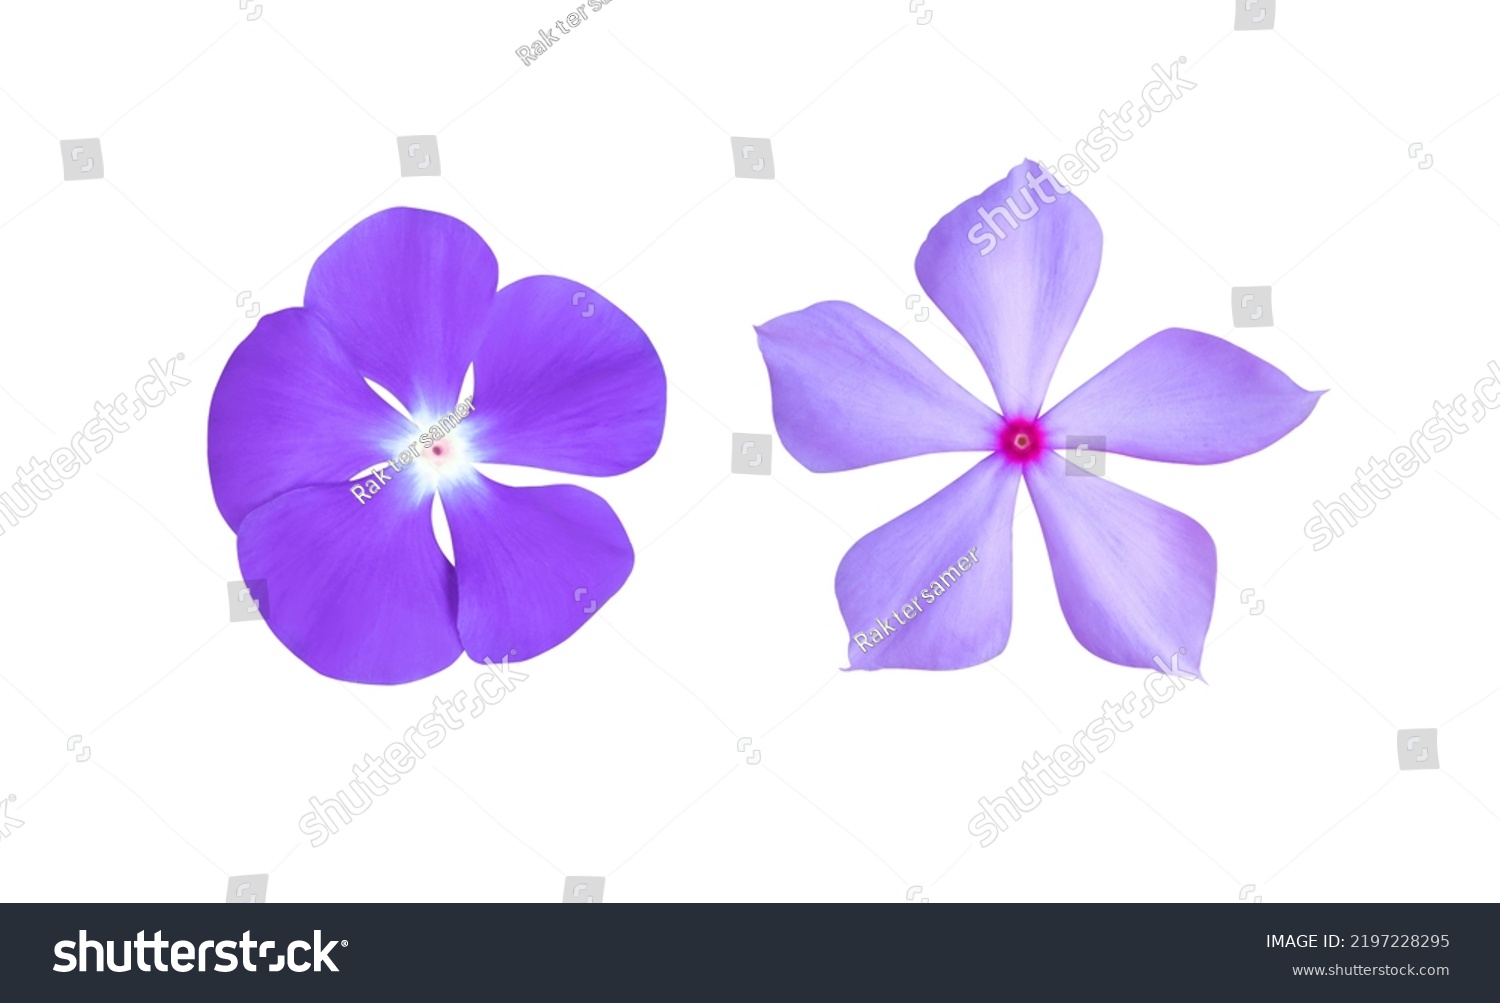 Madagascar periwinkle or Vinca or Old maid or Cayenne jasmine or Rose periwinkle flowers. Collection of red-pink-purple small single flower isolated on white background. #2197228295